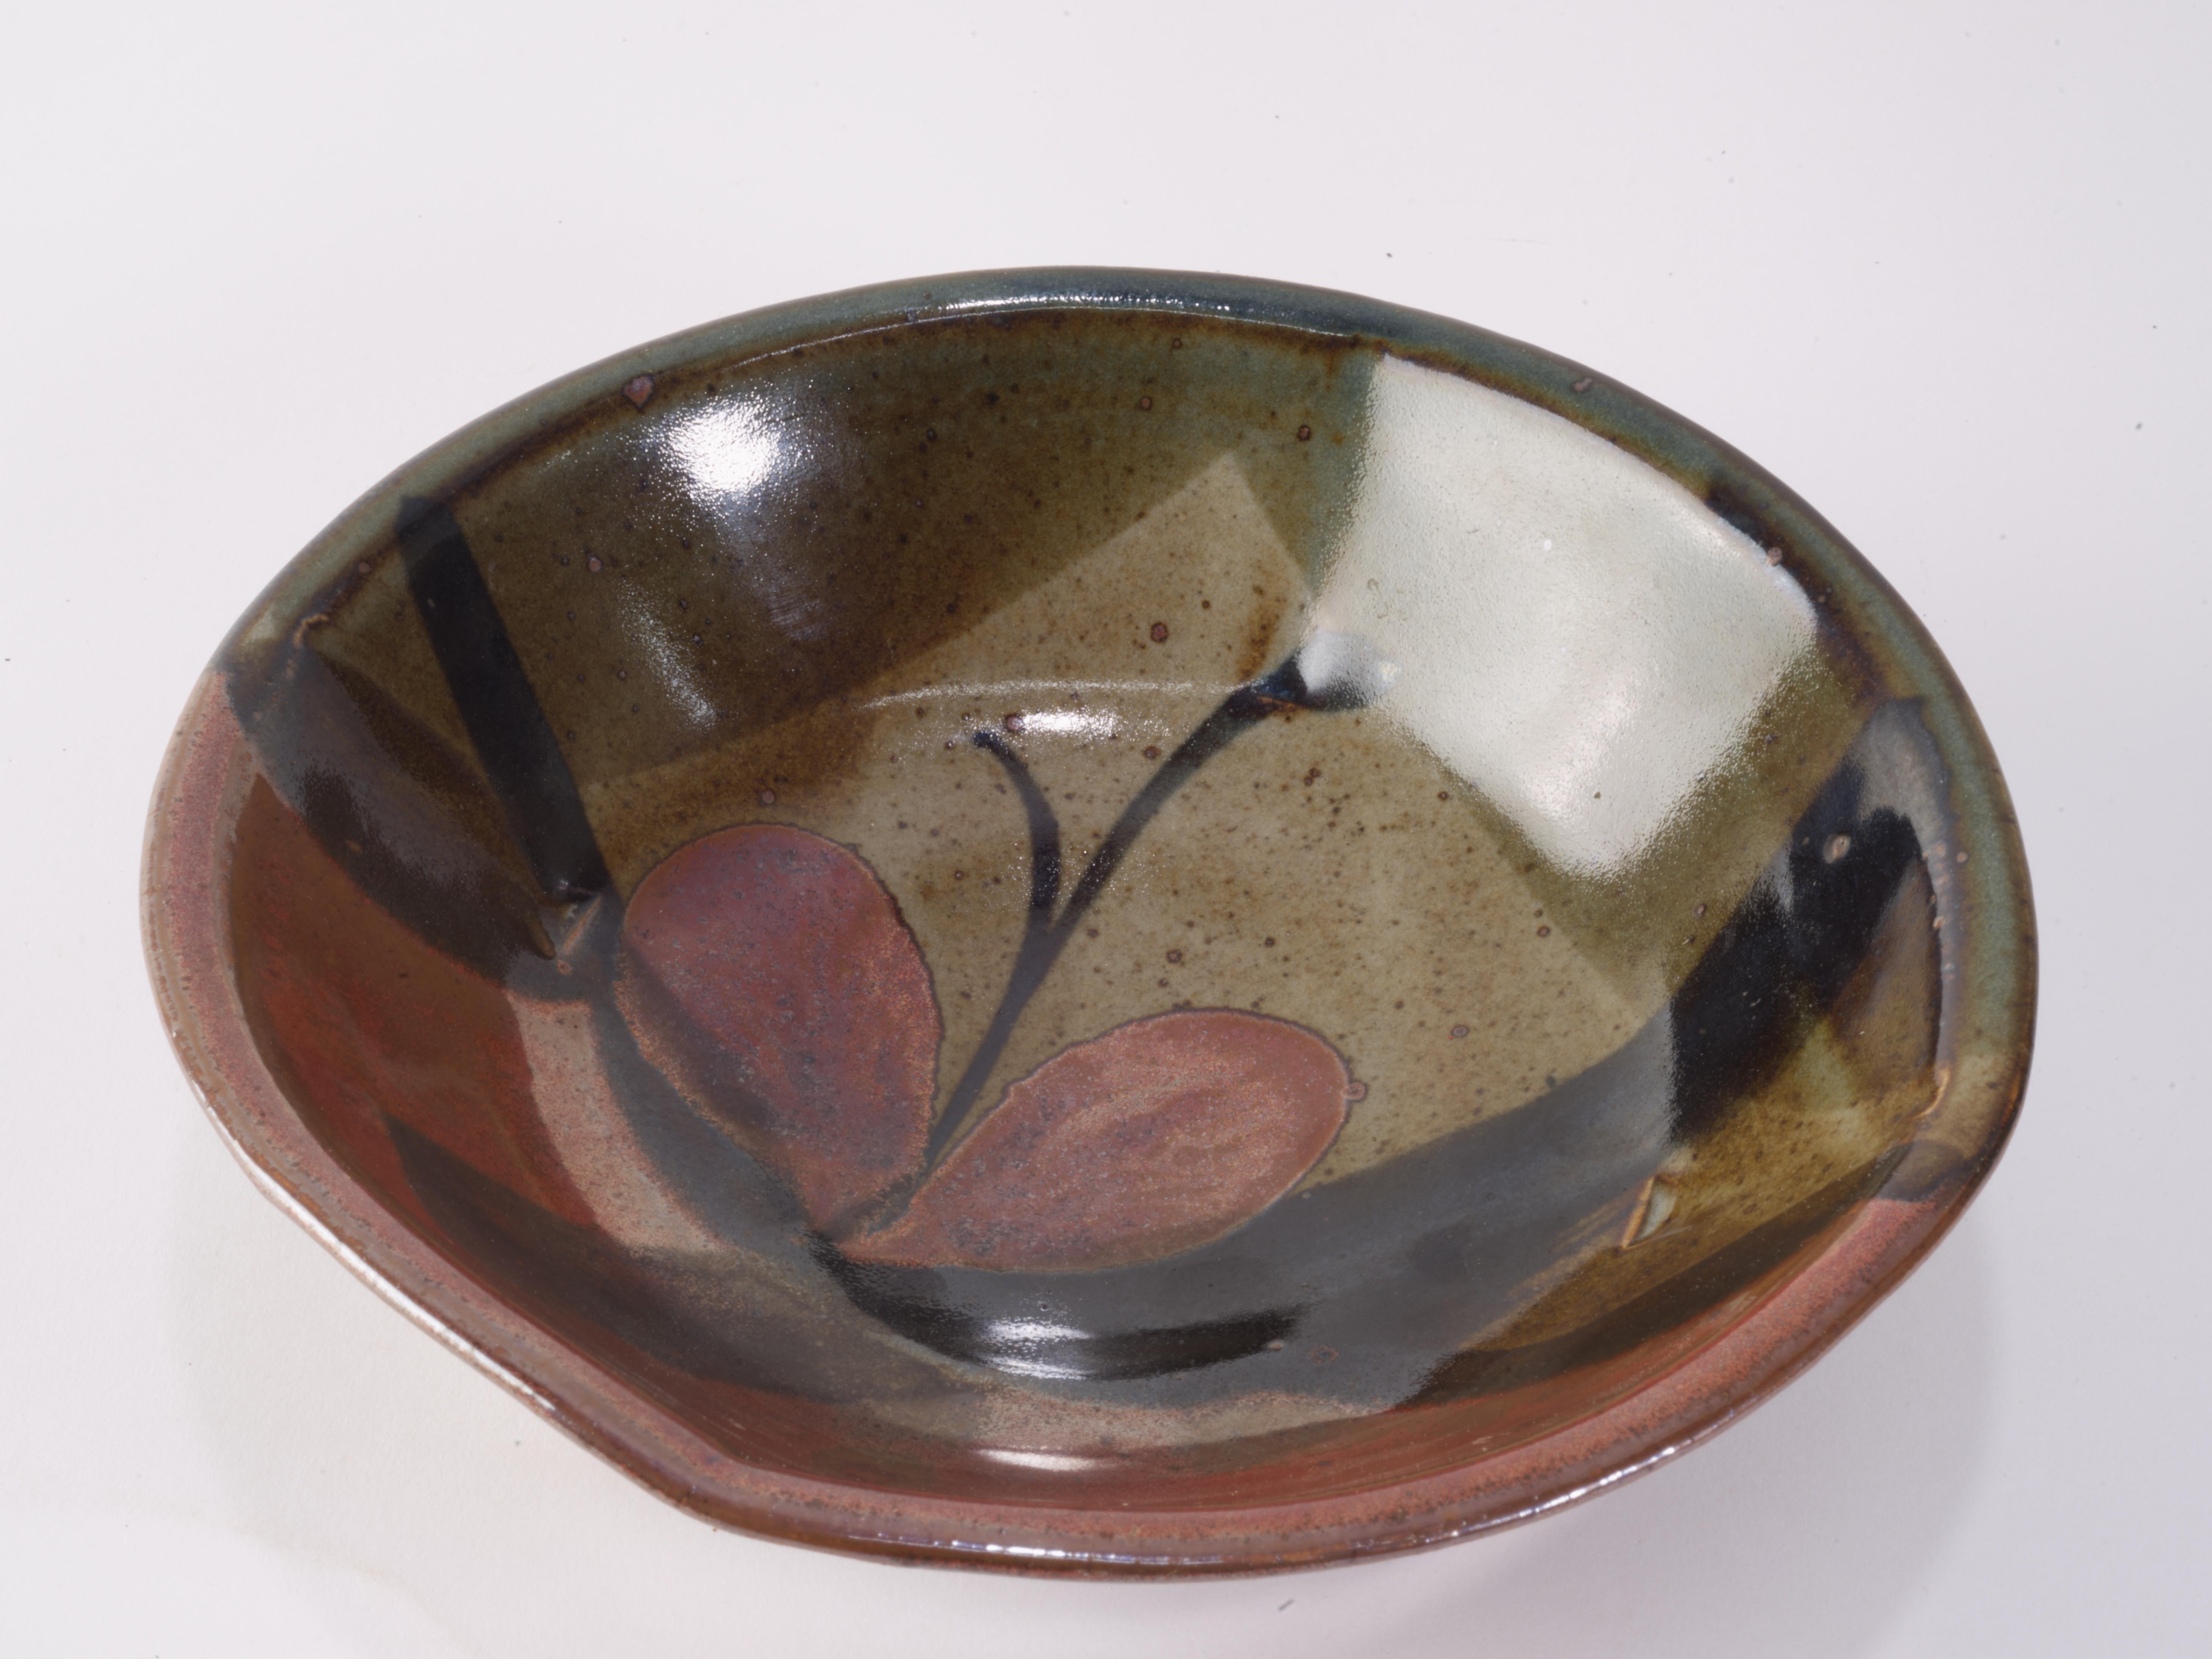  Calligraphy inspired art pottery bowl was made by John Freimarck of Freimarck Pottery as a part of a series created in late 1970s. The hand thrown bowl has a complex shape;  the circular outer rim is gently stretched in four directions, creating a